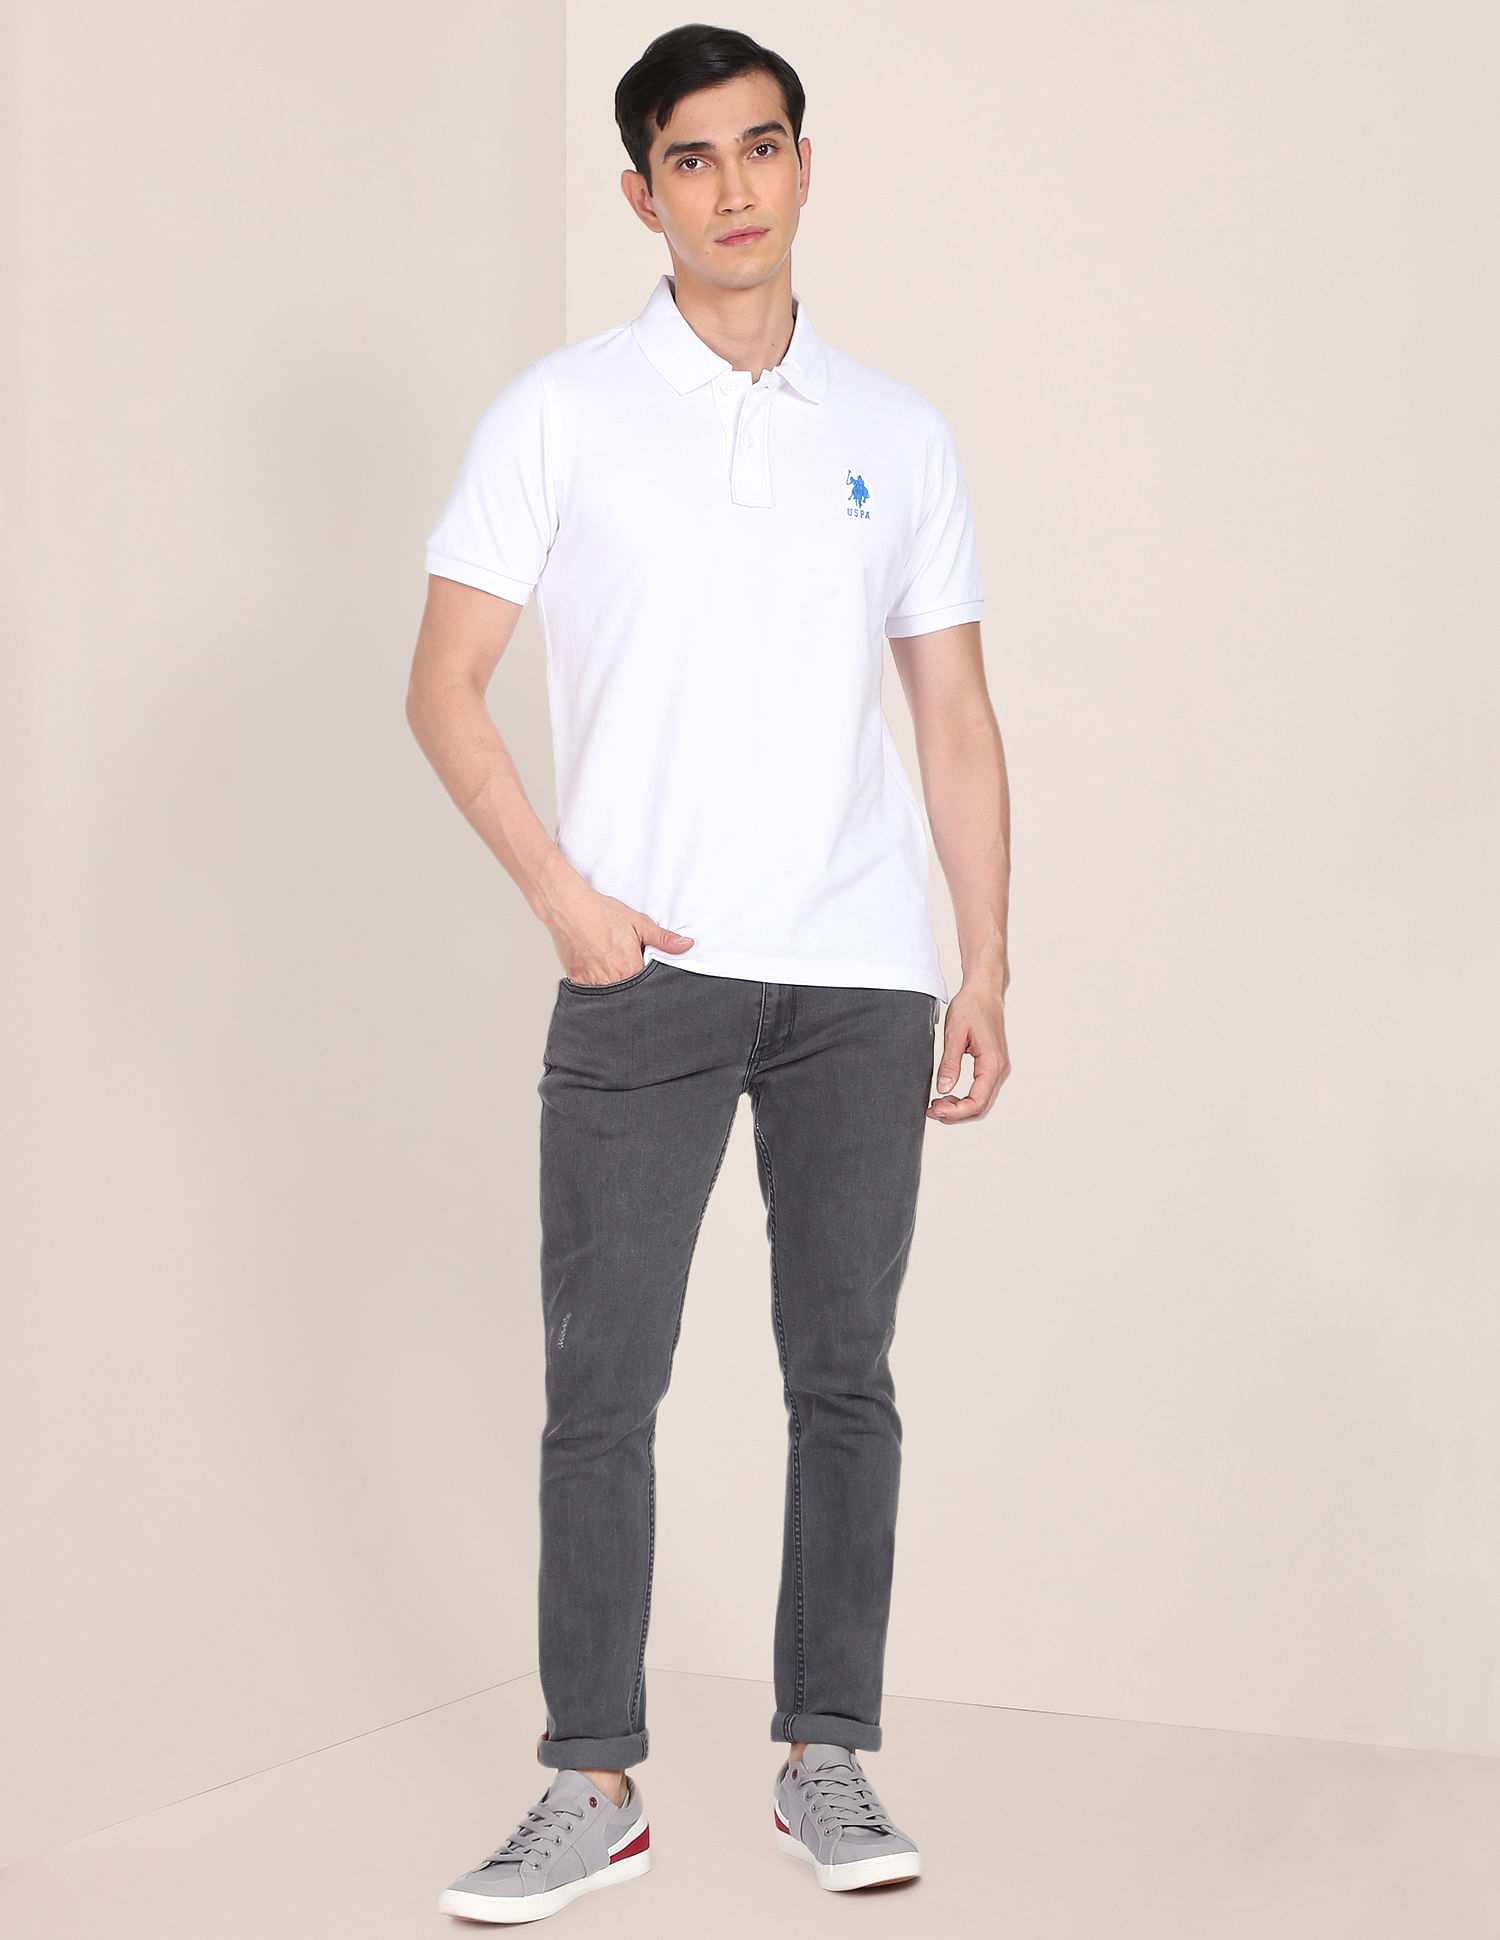 Dutch Line | New polo shirts available now 👕 For orders please send  message , #mensfashion #onlinestore #poloshirt #clothingbrand  #shoppingonline... | Instagram